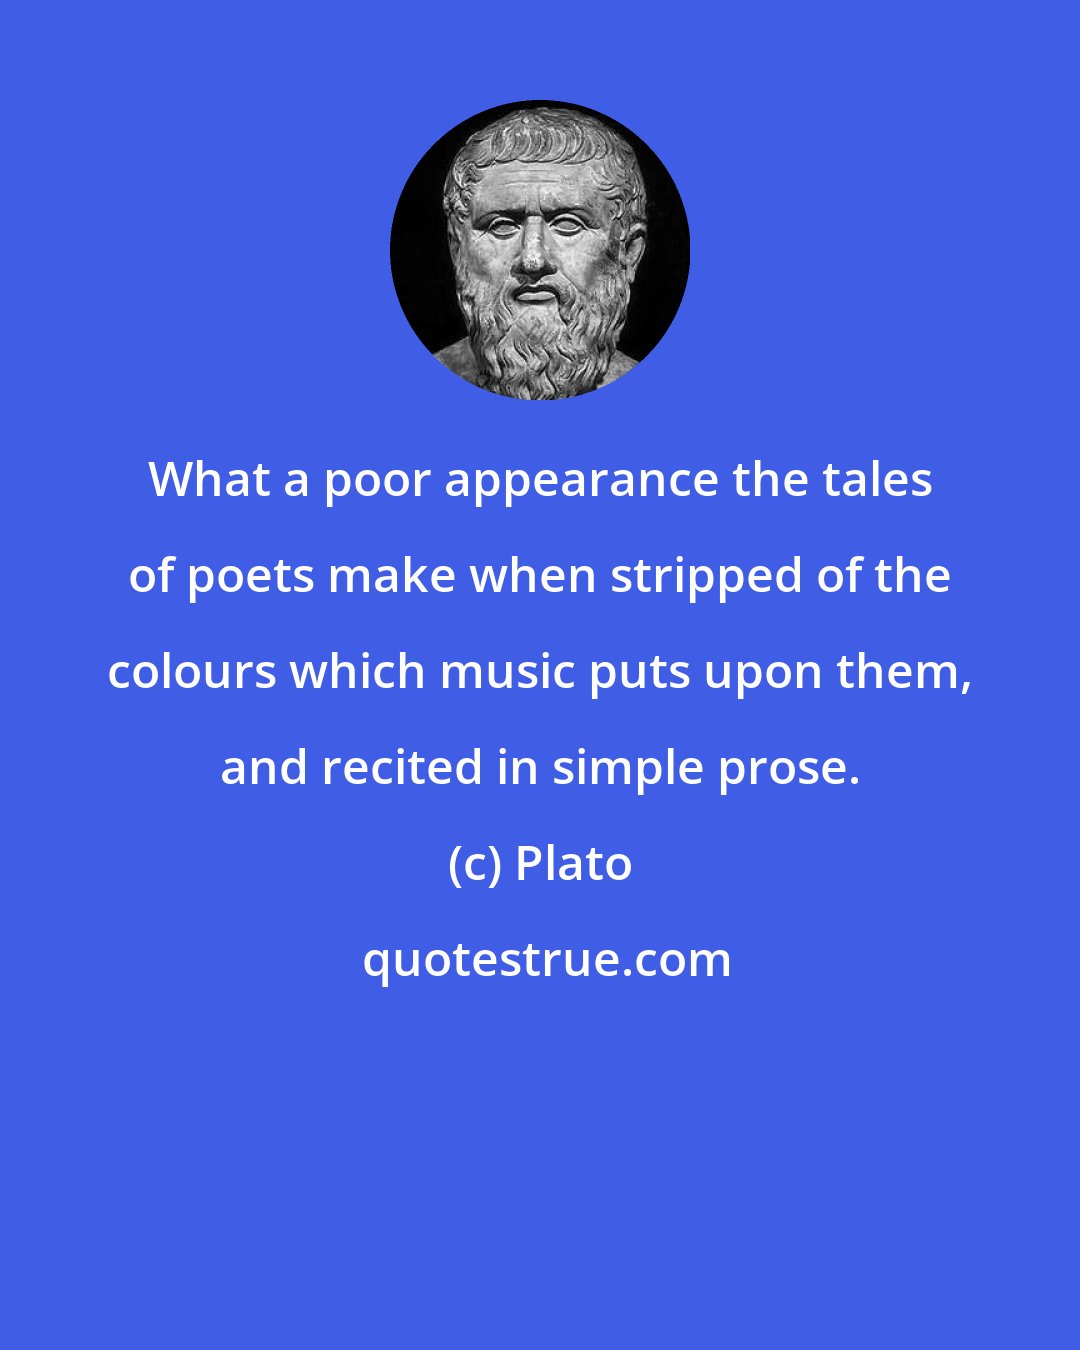 Plato: What a poor appearance the tales of poets make when stripped of the colours which music puts upon them, and recited in simple prose.